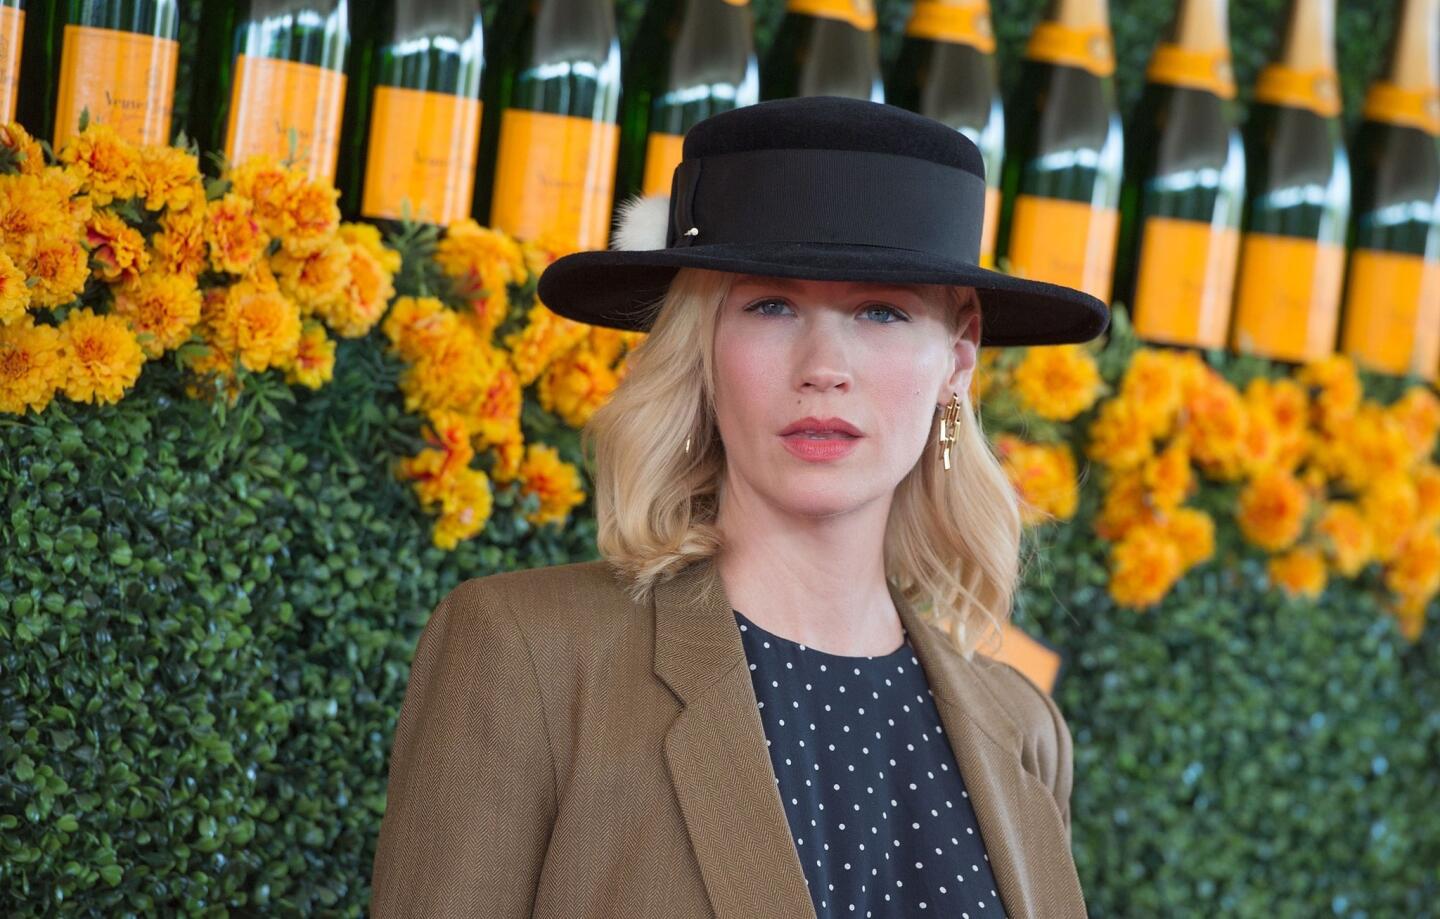 January Jones arrives at the Veuve Clicquot Polo Classic in support of Will Rogers State Historic Park on Saturday.